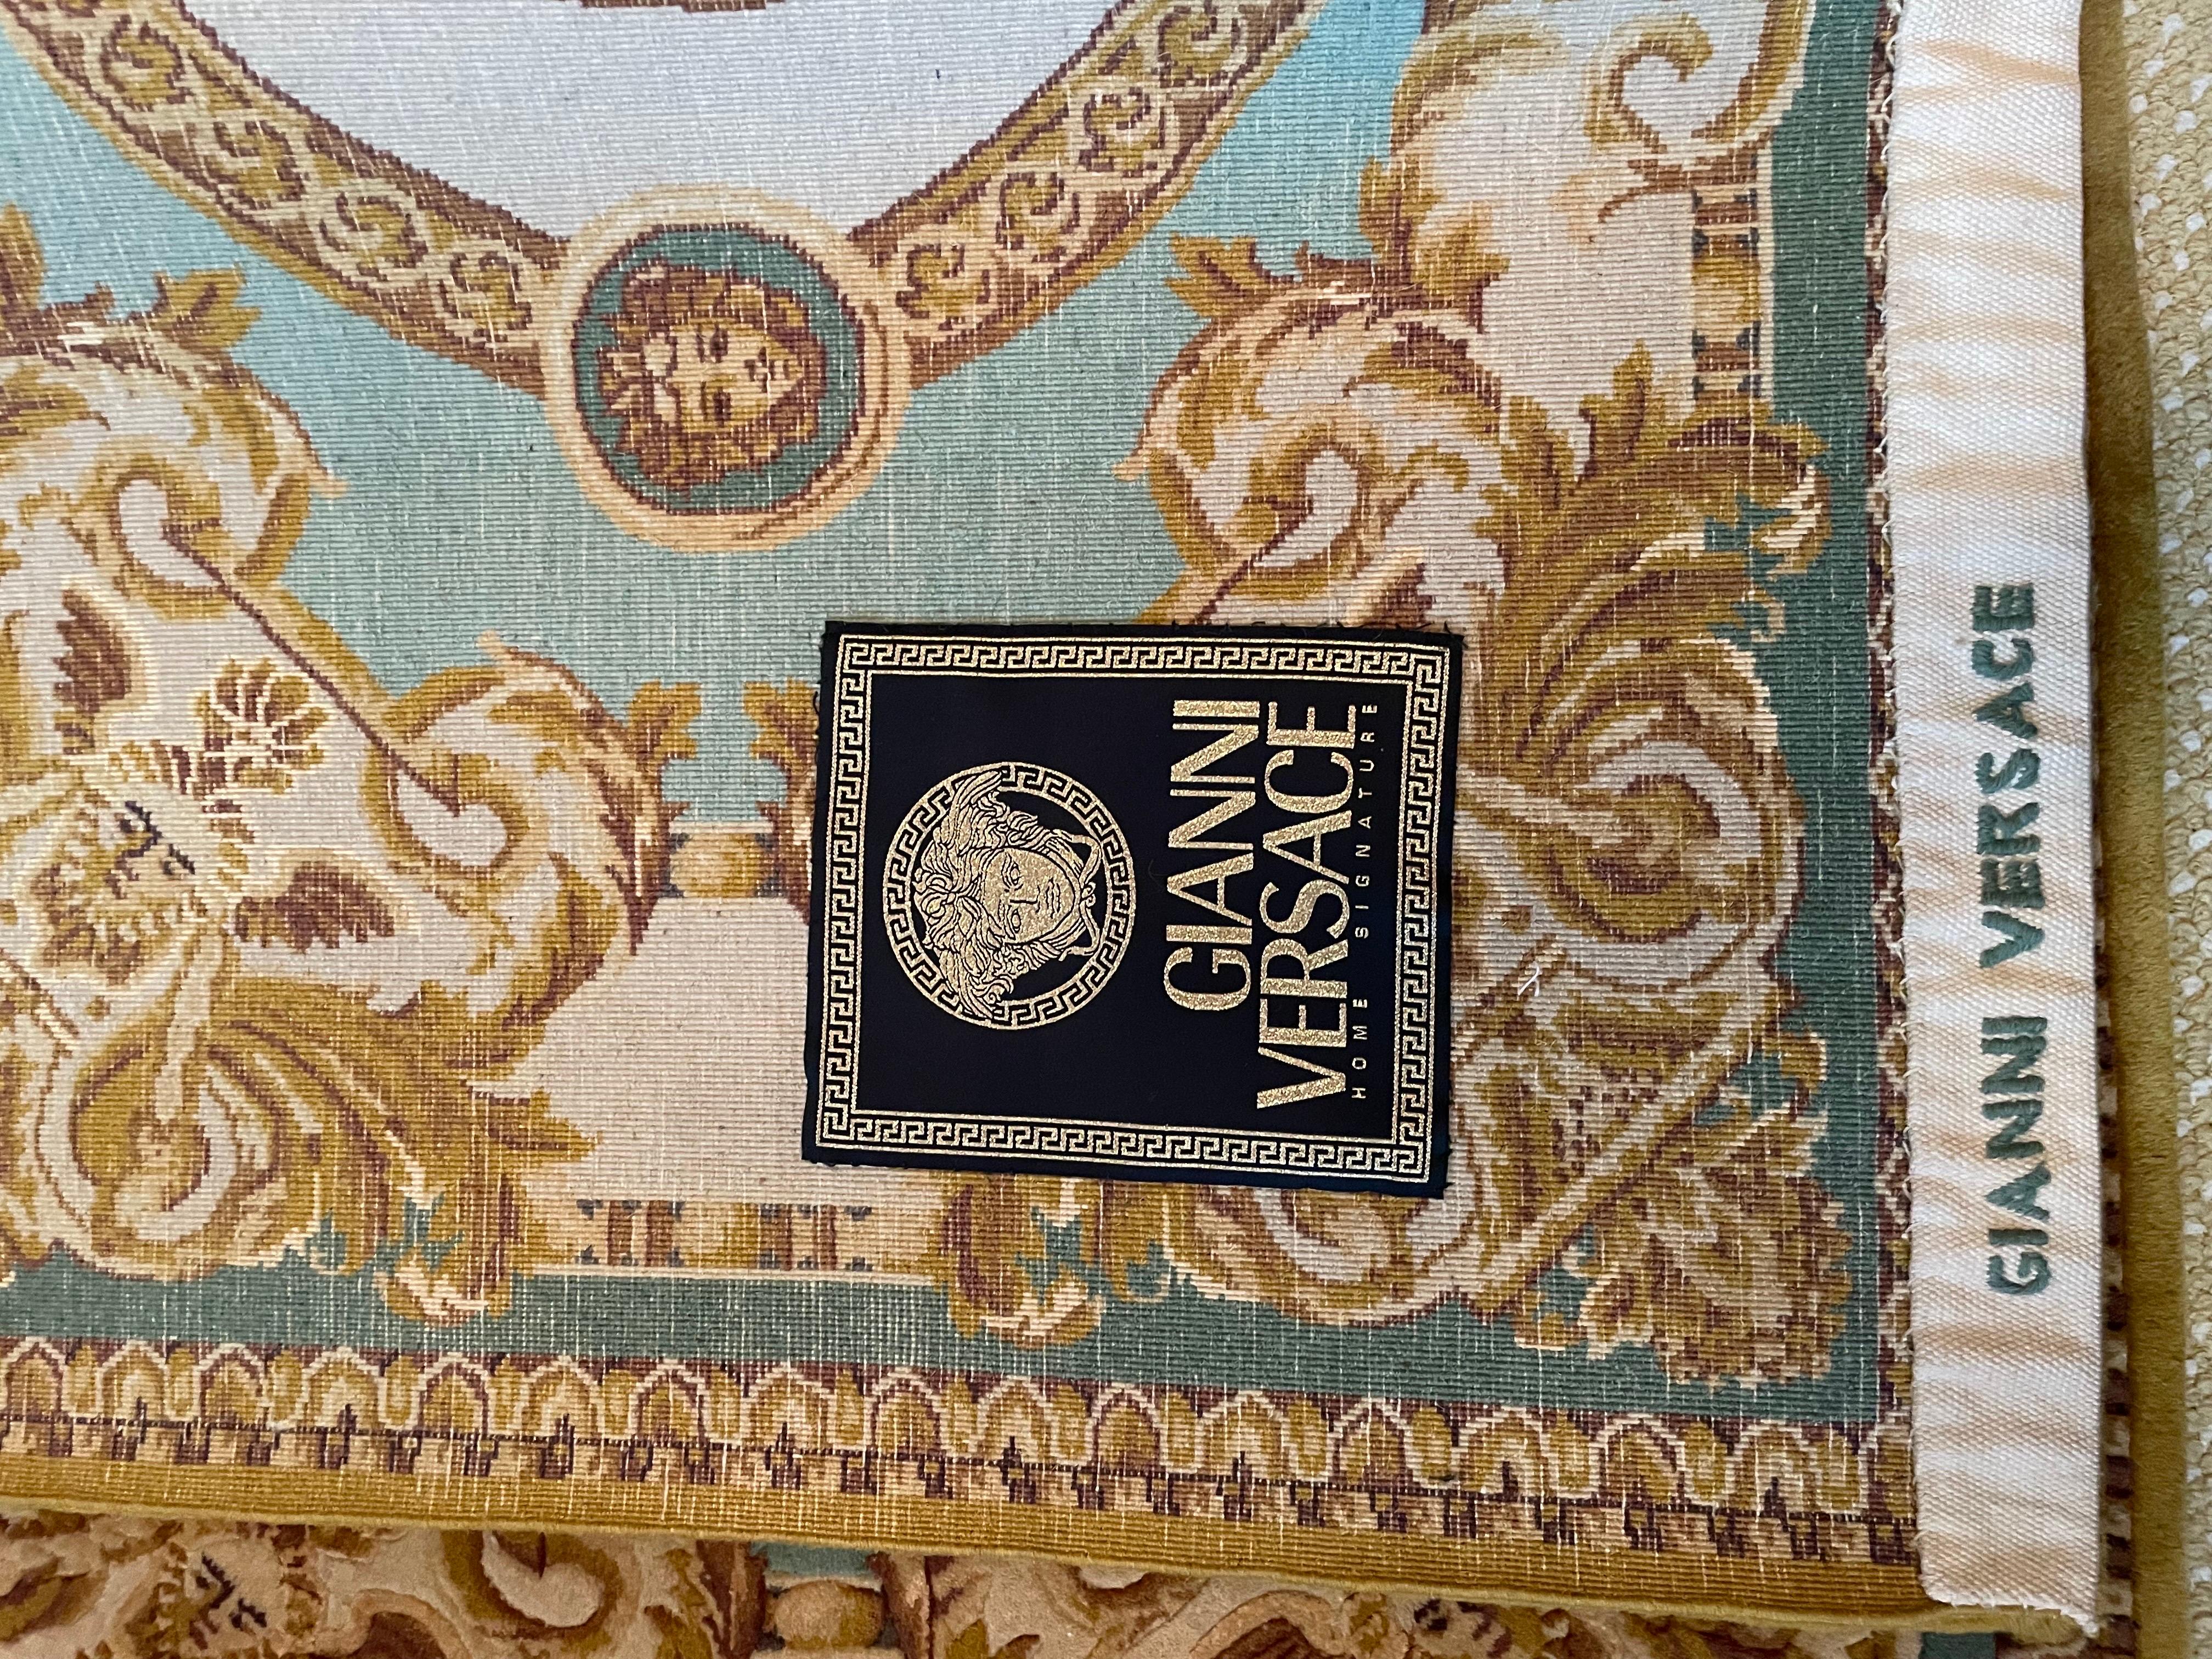 Gianni Versace Rug Wool and Silk Hand Knotted  In Excellent Condition For Sale In Long Island, NY